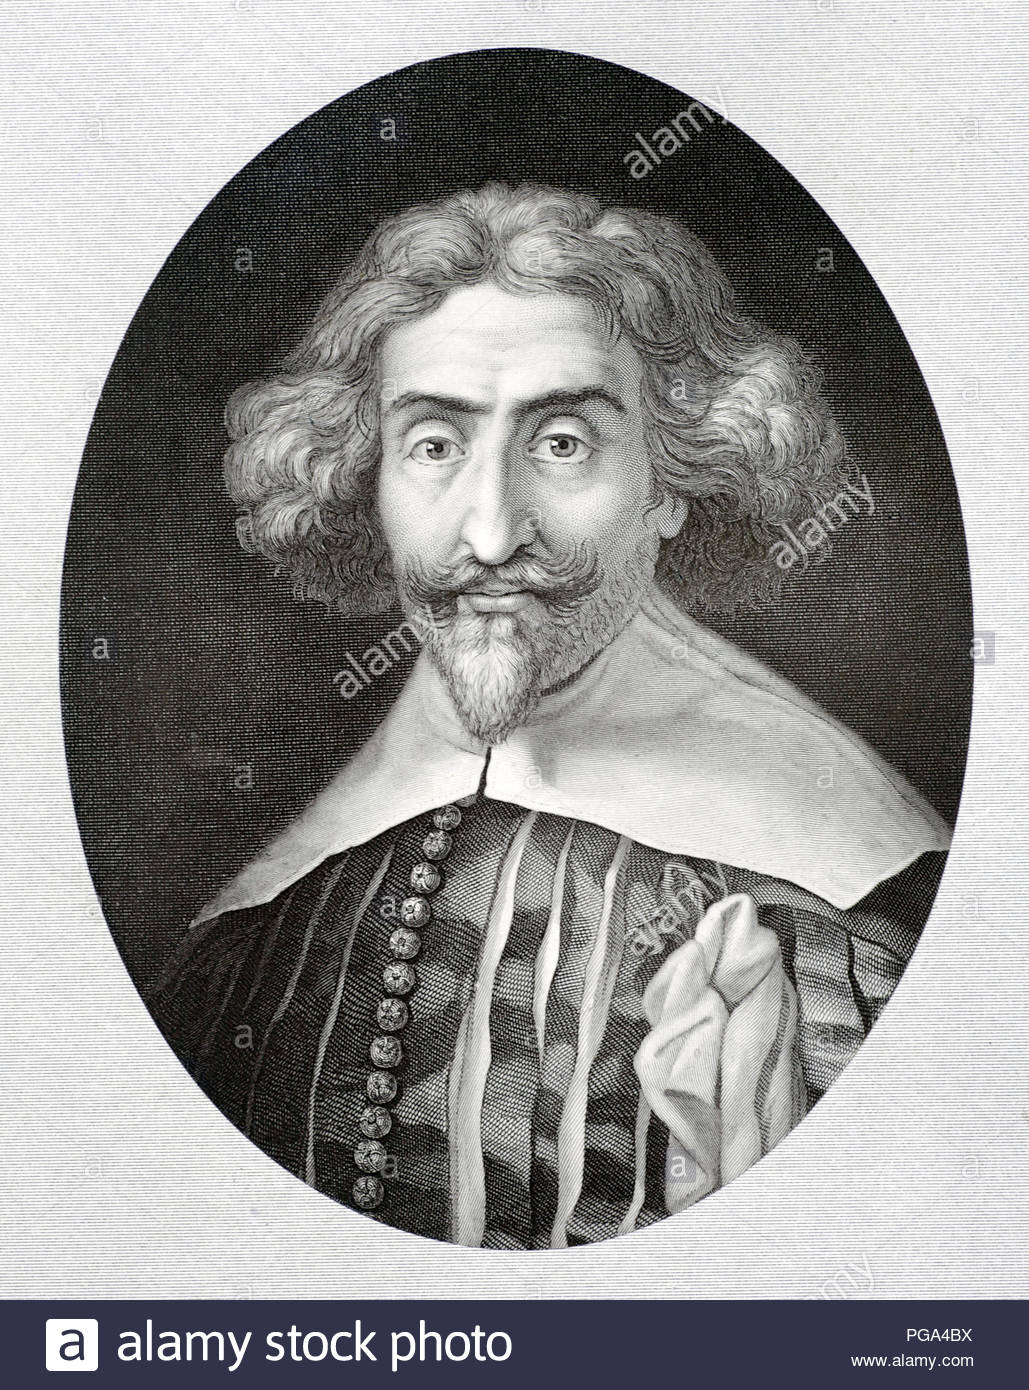 Miguel de Cervantes portrait, 1547  –  1616 was a Spanish writer who is widely regarded as the greatest writer in the Spanish language and one of the world's pre-eminent novelists. His novel Don Quixote has been translated into more languages than any other book except the Bible, antique illustration from 1880 Stock Photo